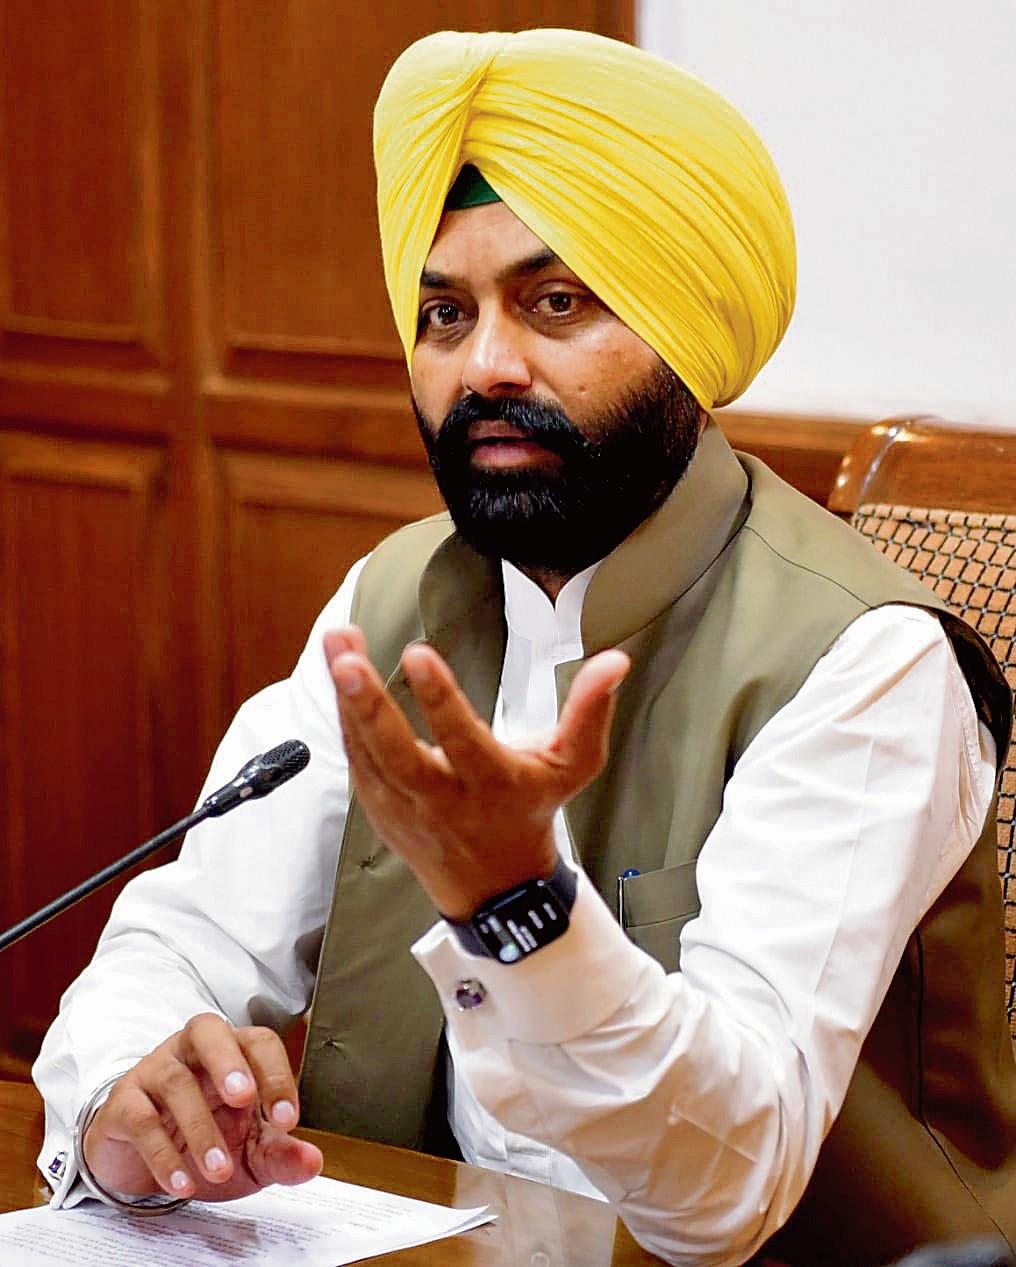 Row over dissolution of Punjab panchayats: From beginning to end, minister involved in decision at every step